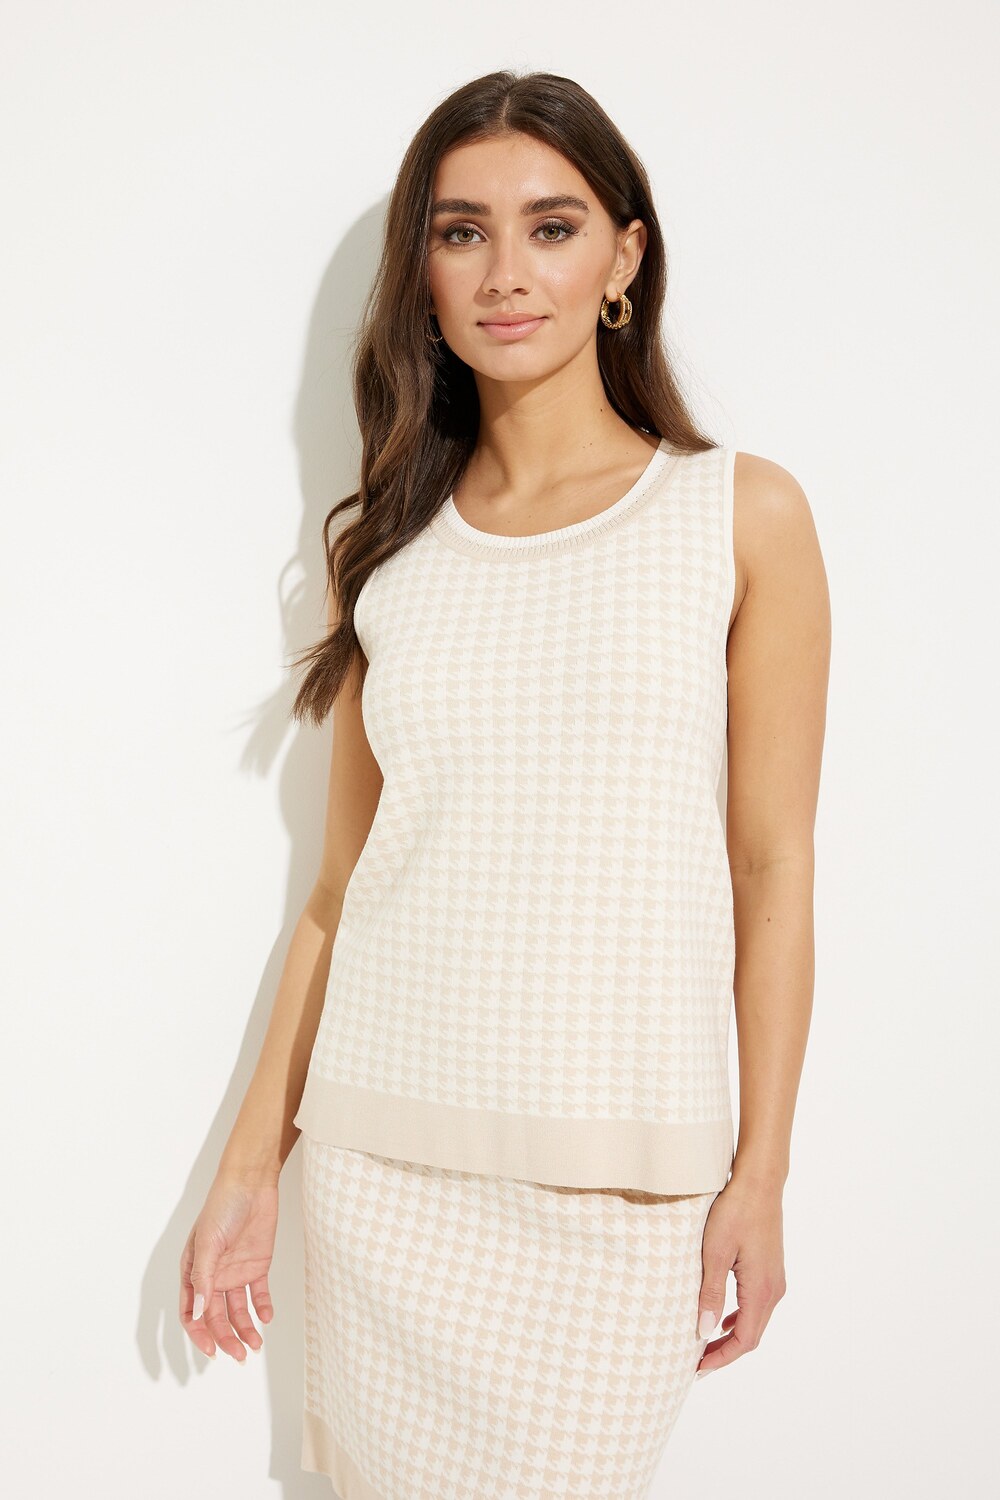 Houndstooth Print Sleeveless Top Style SP2345. Ivory